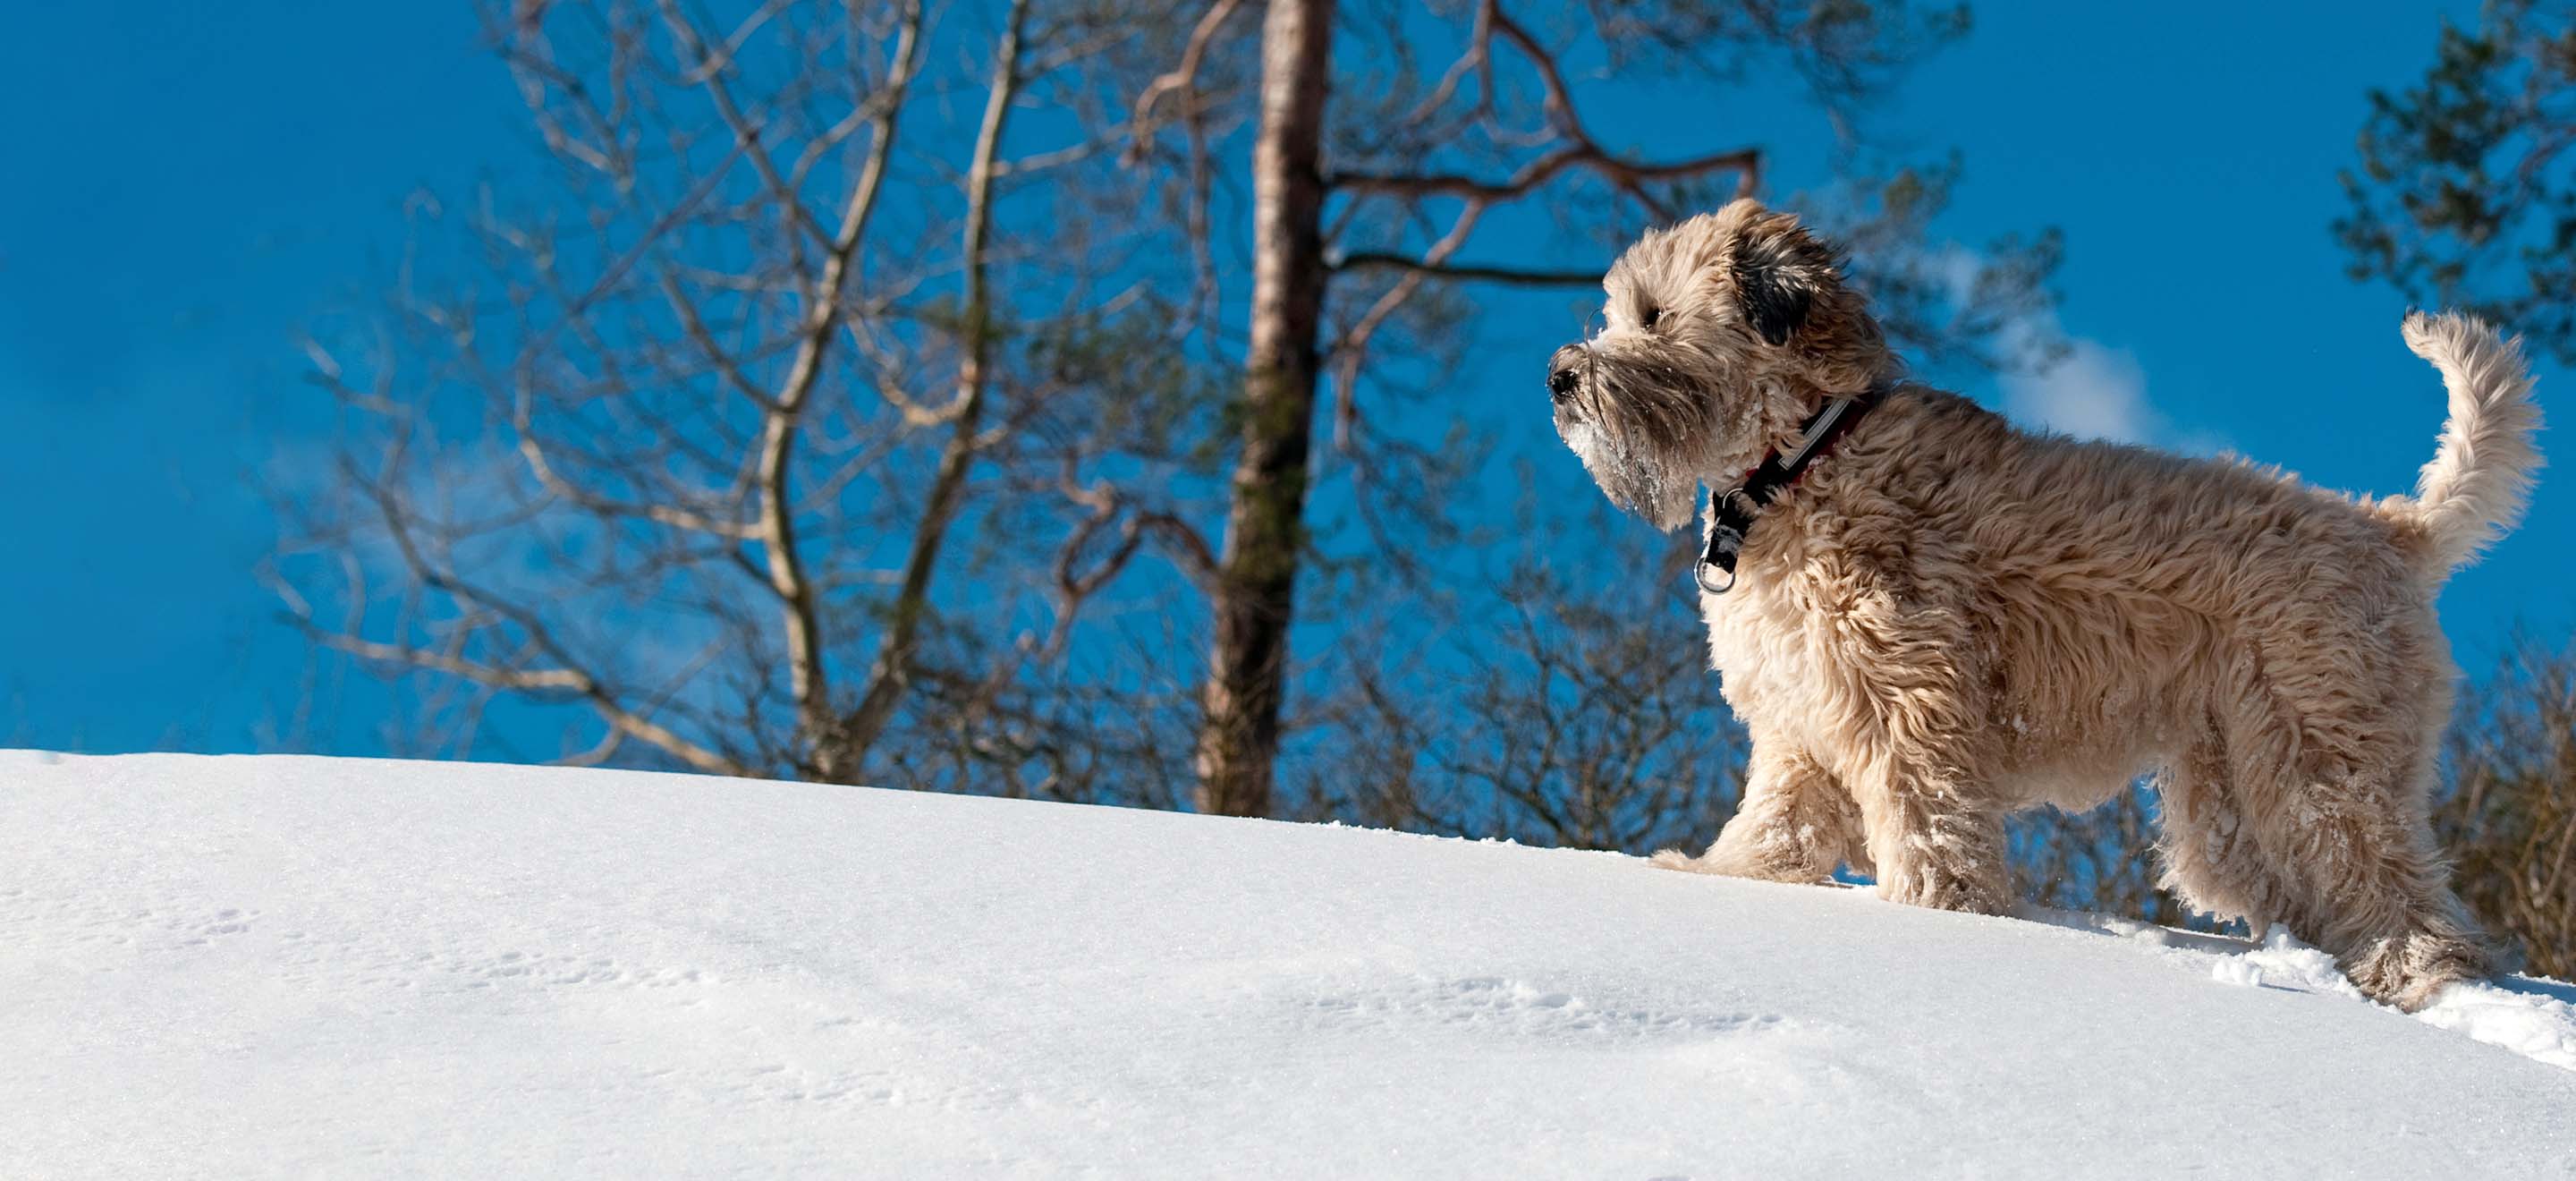 A Wheaten Terrier dog walking up a snowy hill in front of a blue sky image